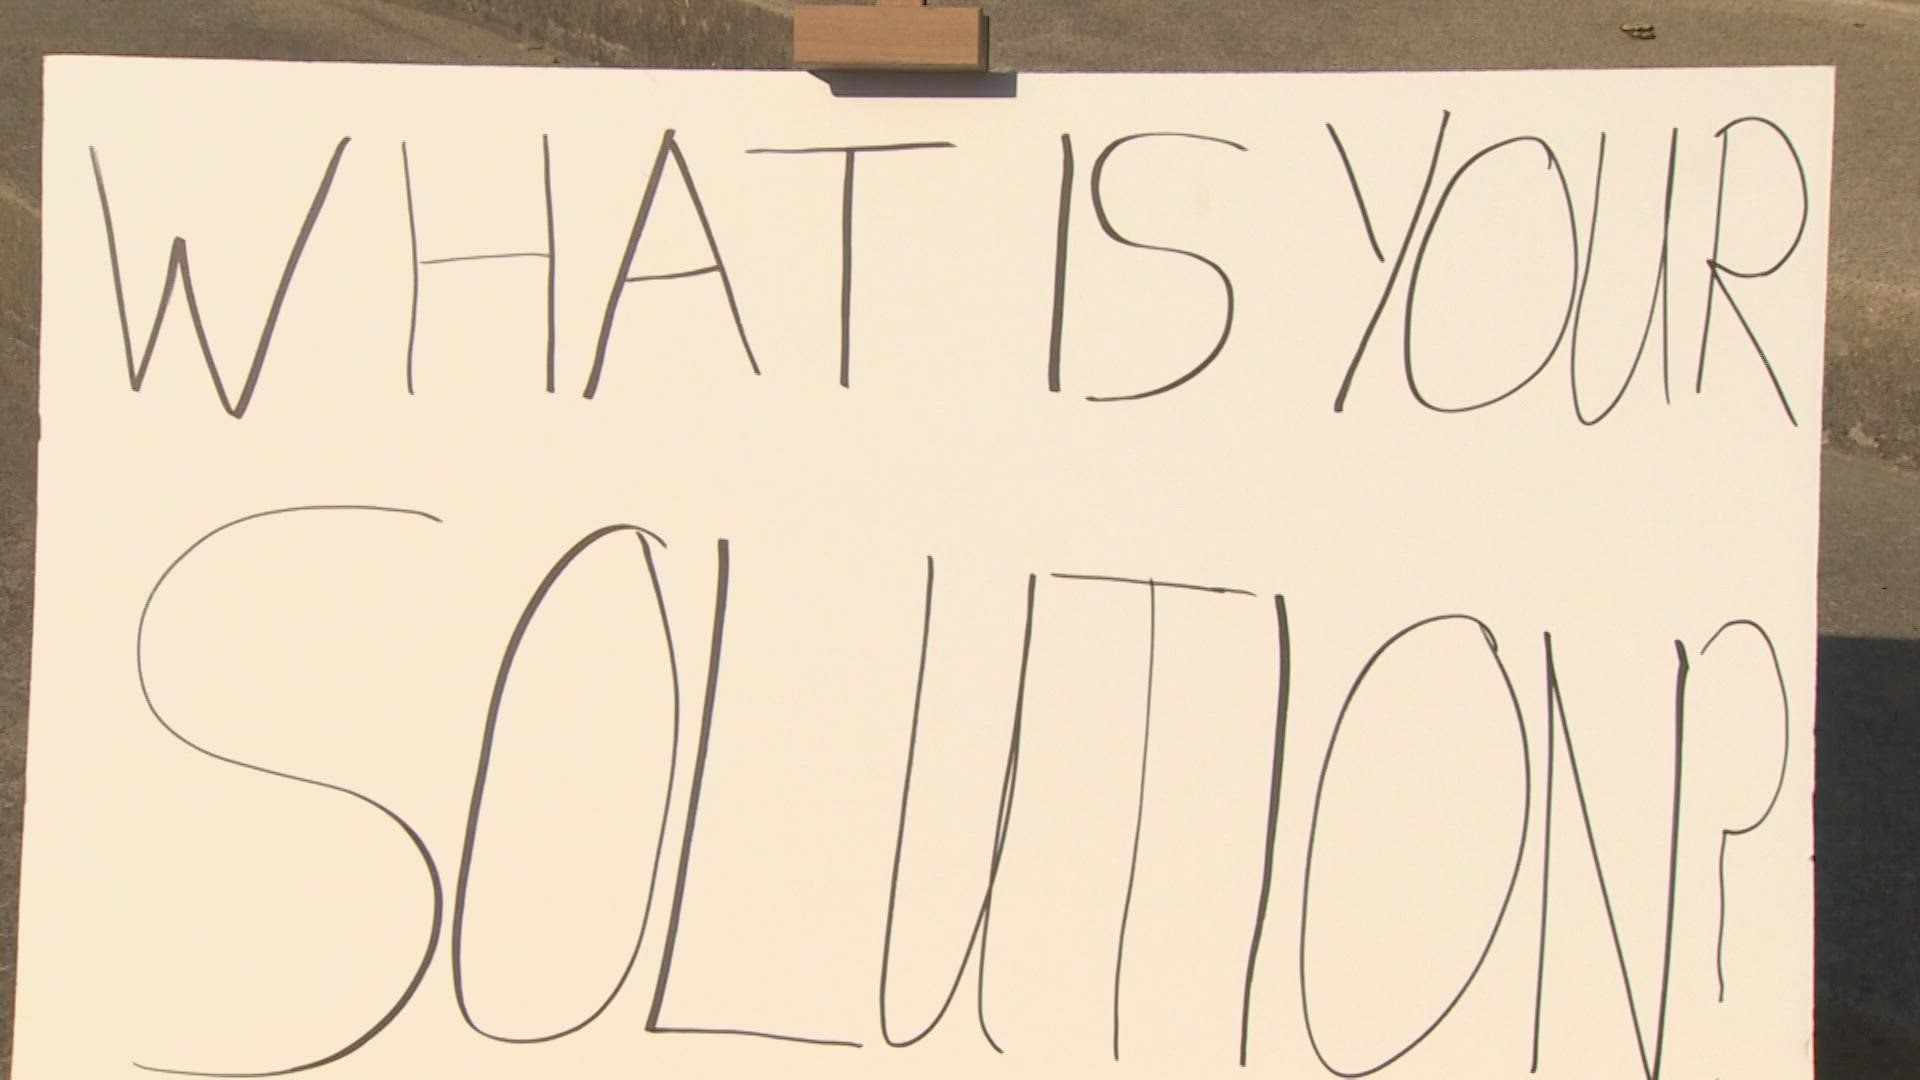 After setting up two chairs and a camera, WFAA wrote a question on a nearby whiteboard and waited for anyone who wanted to speak their mind: "What is your solution?"